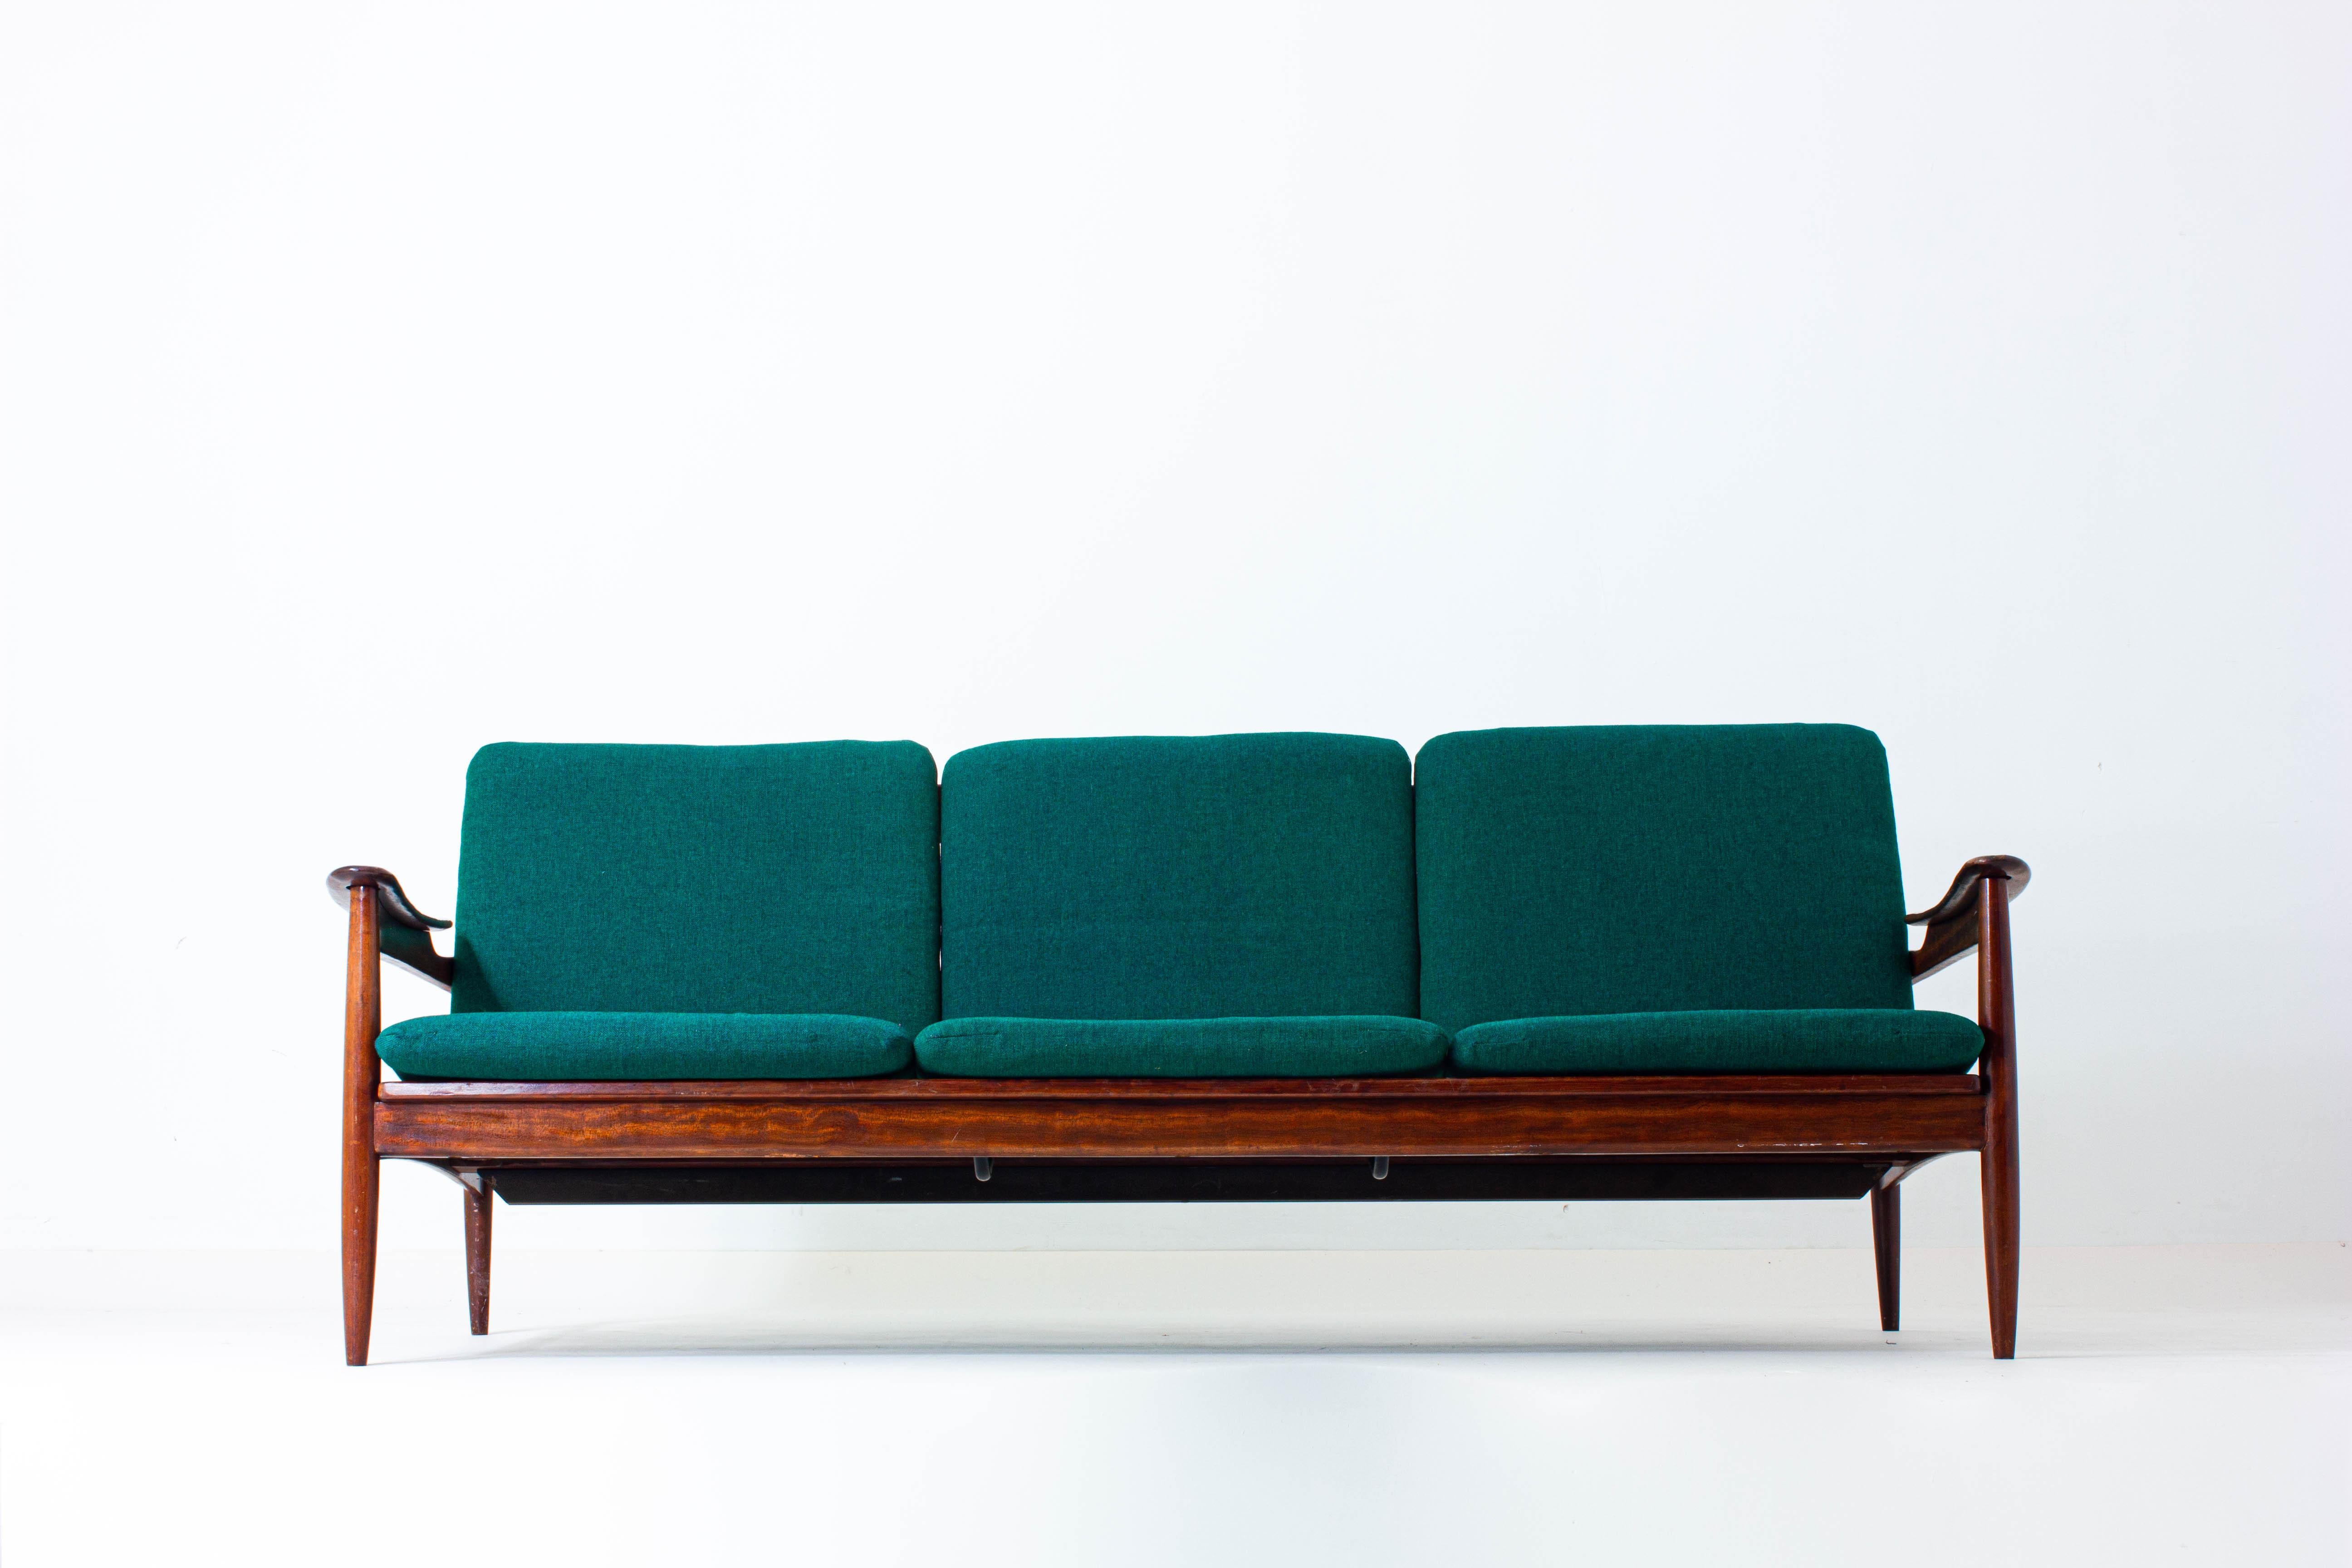 Mid-Century Modern Rosewood 3-Seater Sofa in Emerald Green Upholstery, Denmark, 1960s